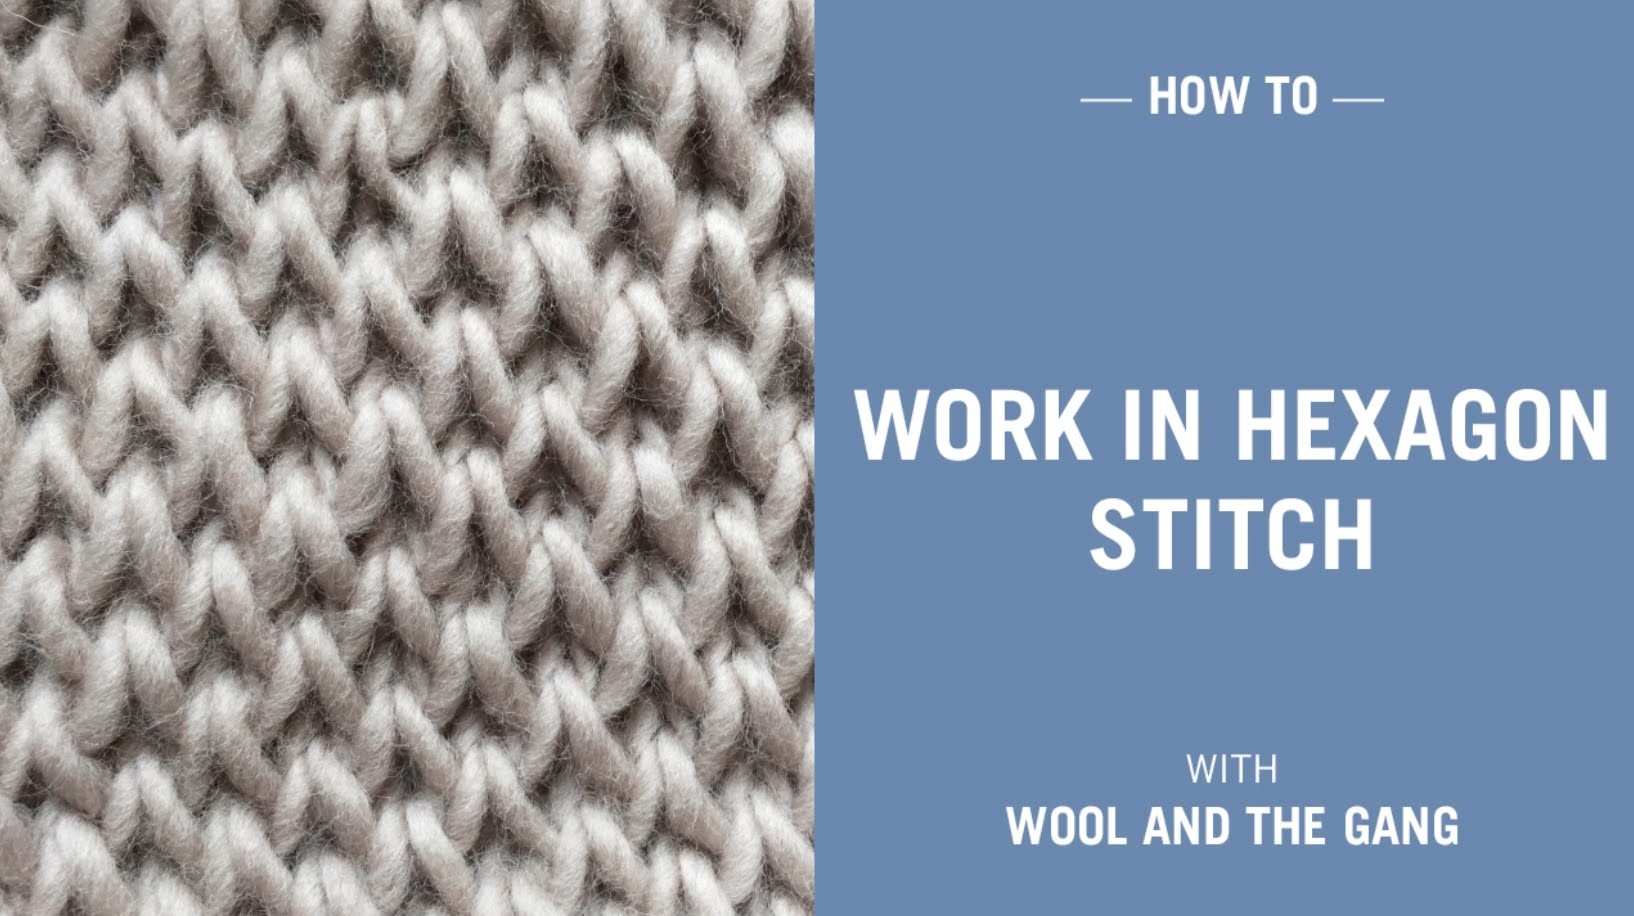 How to work in hexagon stitch